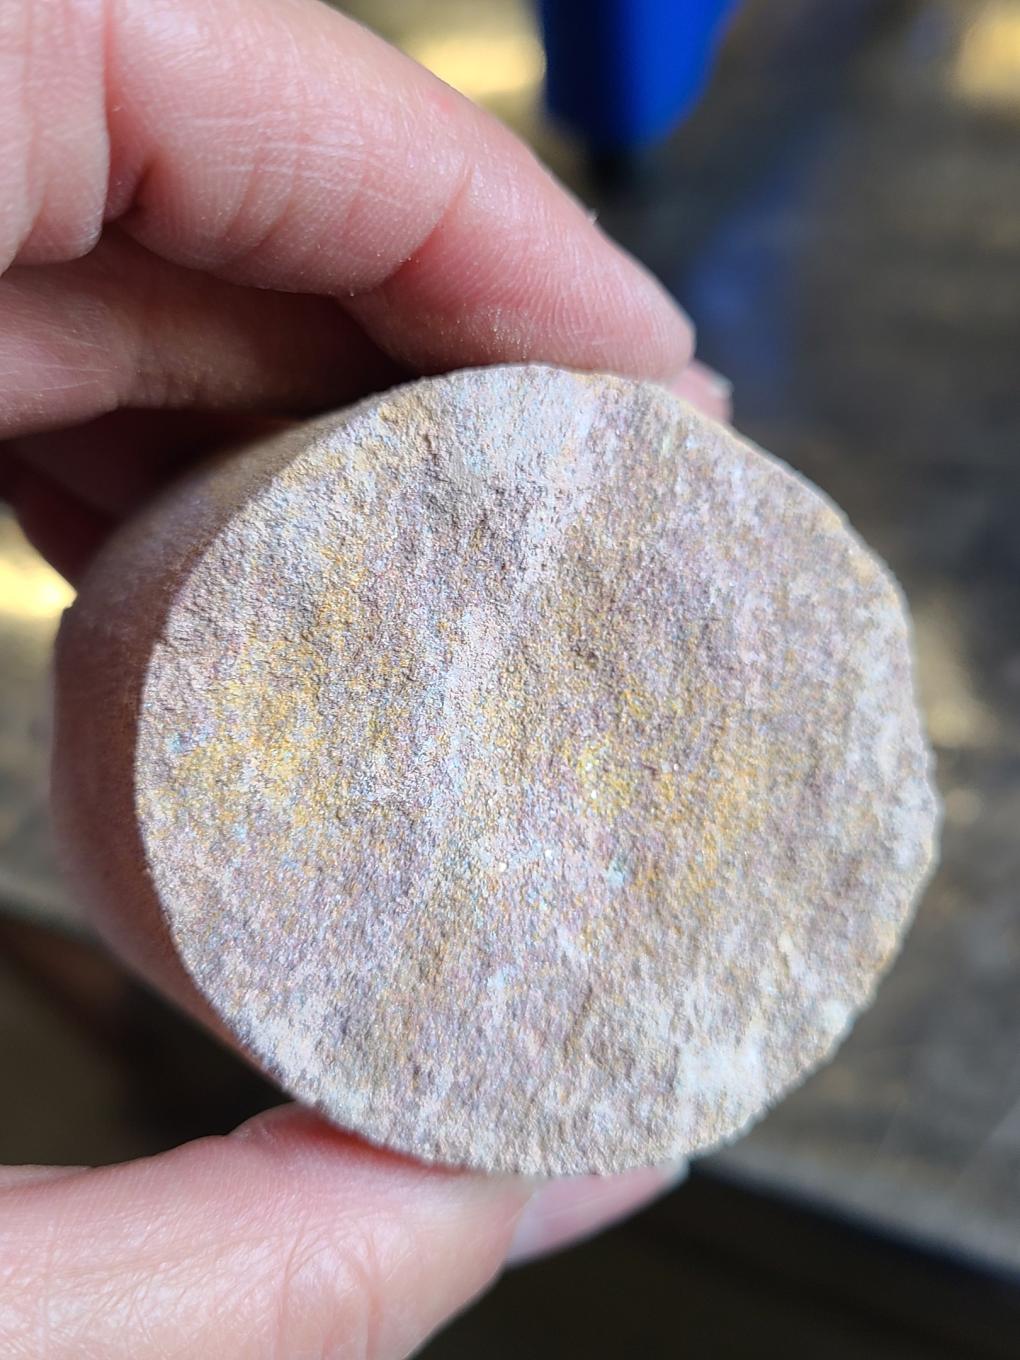 "A core sample of clay in the lab. The Mercer Clay, a large deposit in central Pennsylvania, may be a secondary source of the battery metal lithium. Credit: Patrick Mansell. All Rights Reserved."